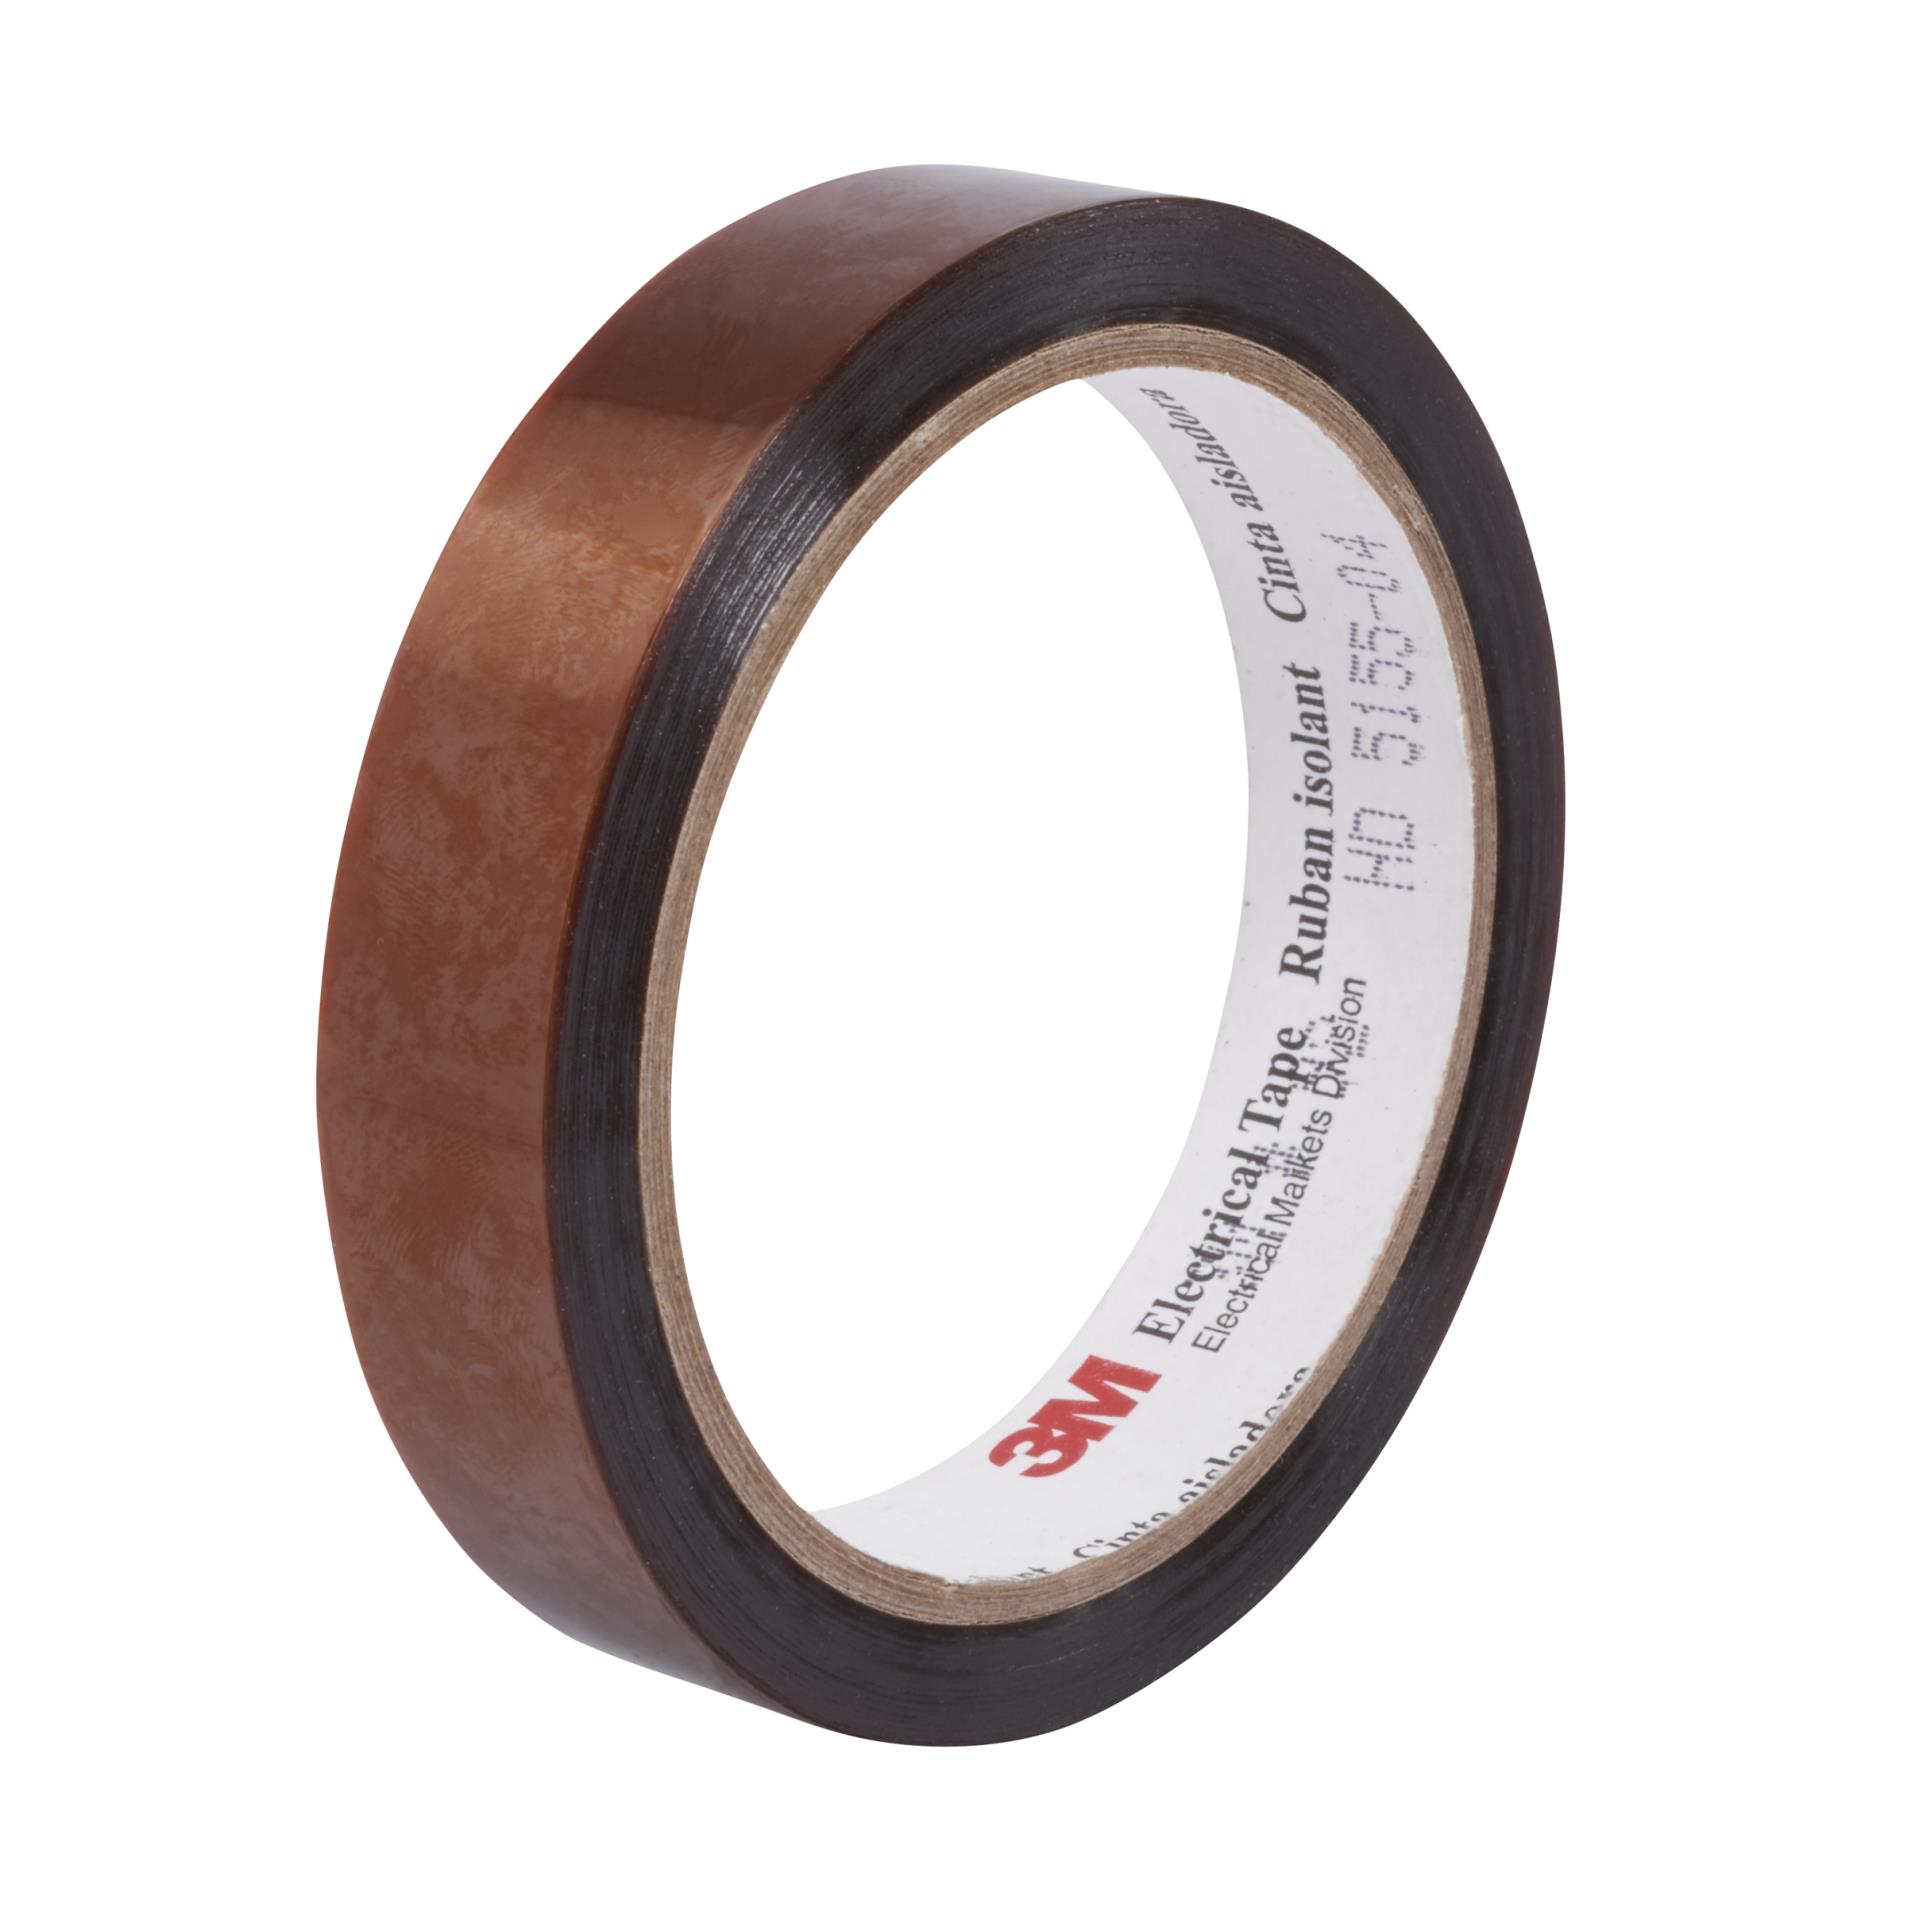 30 Meters Single Side Conductive Polyimide Tape Strip Adhesive Resist Tape P BB 